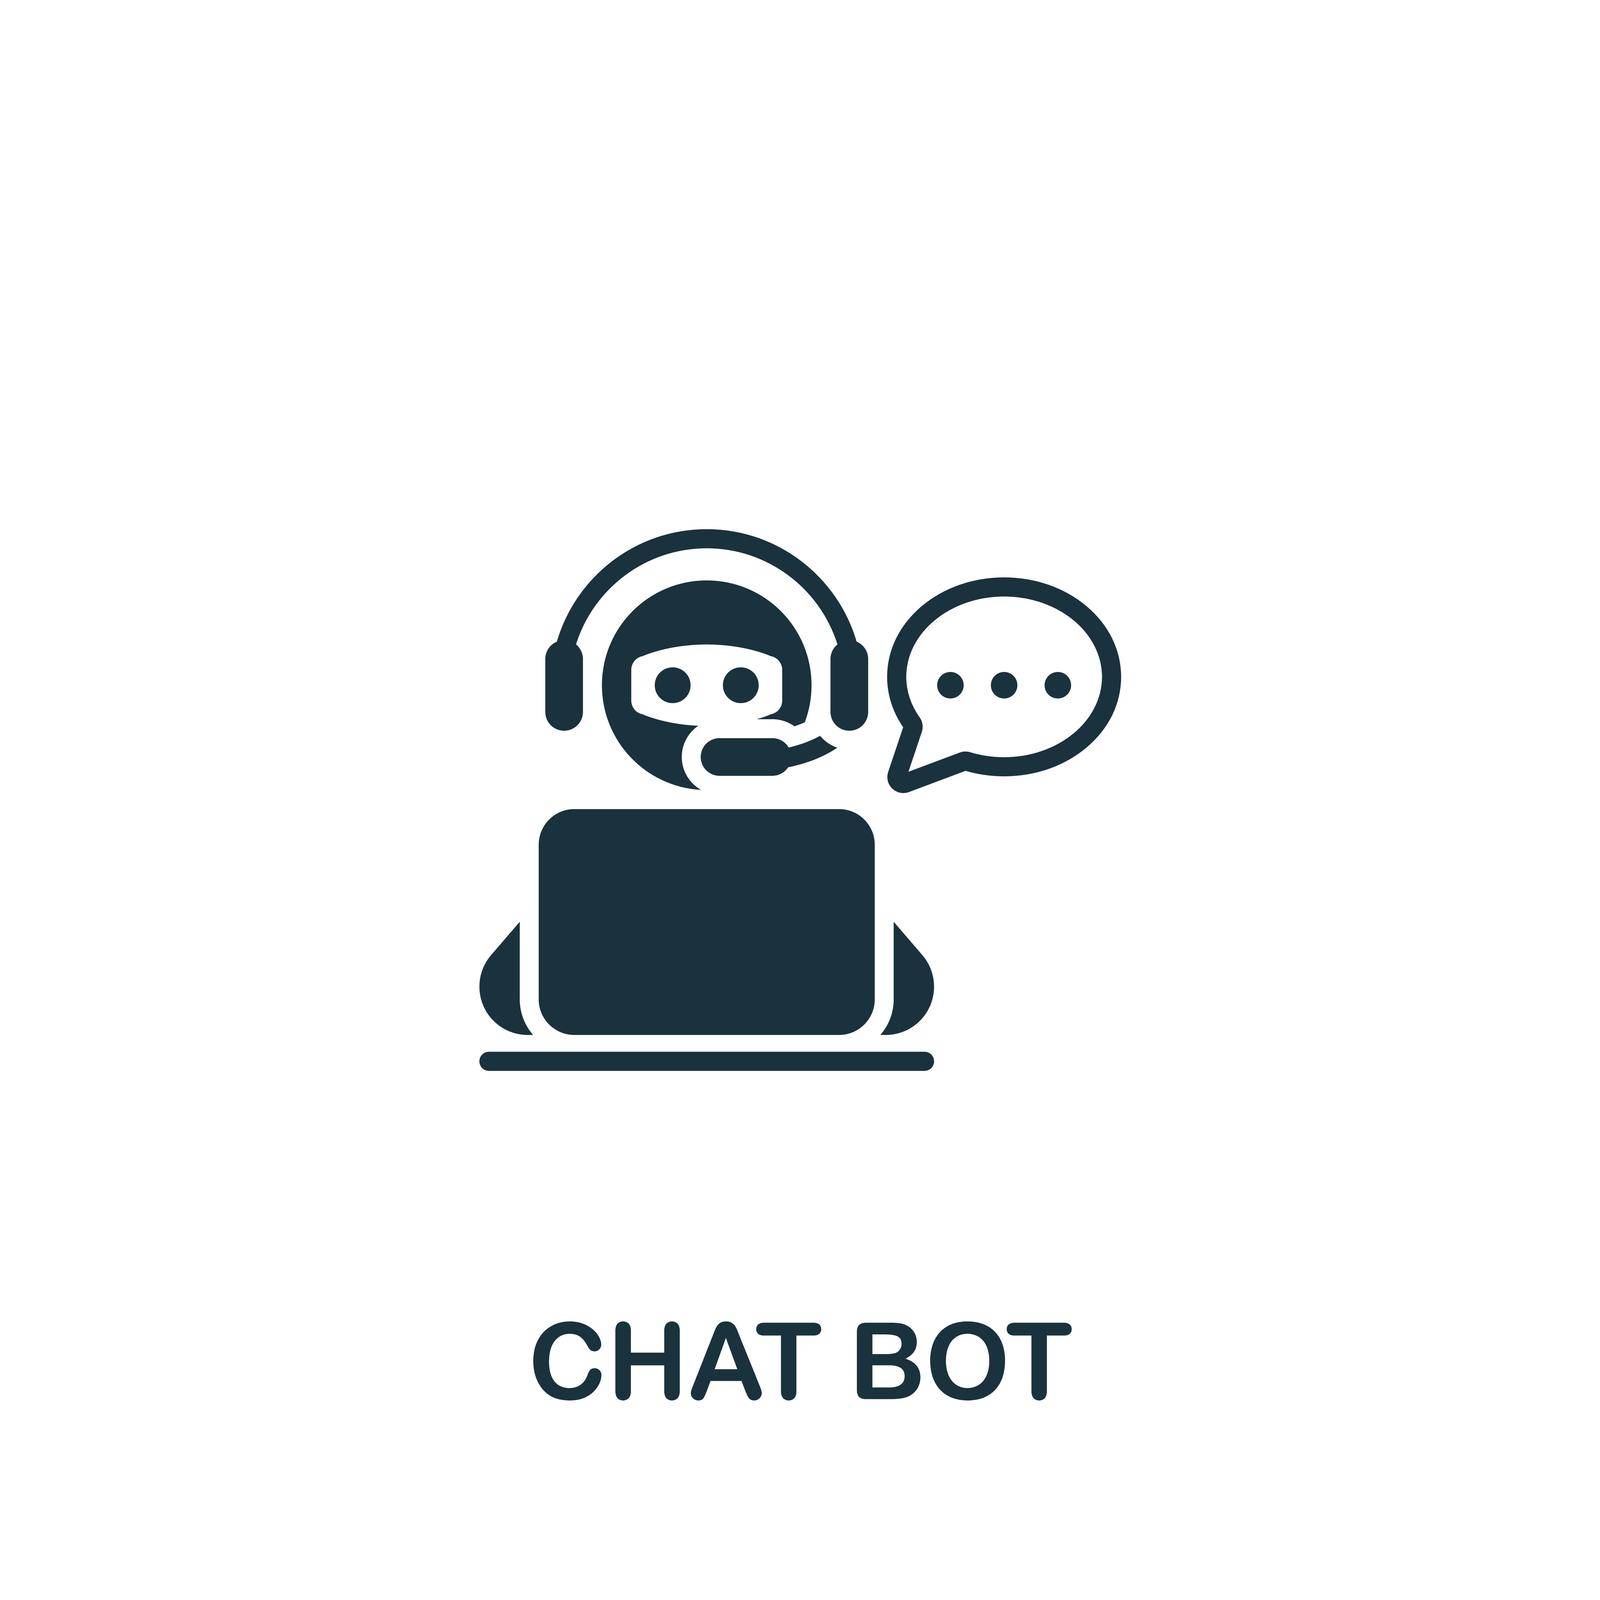 Chat Bot icon. Simple line element symbol for templates, web design and infographics.